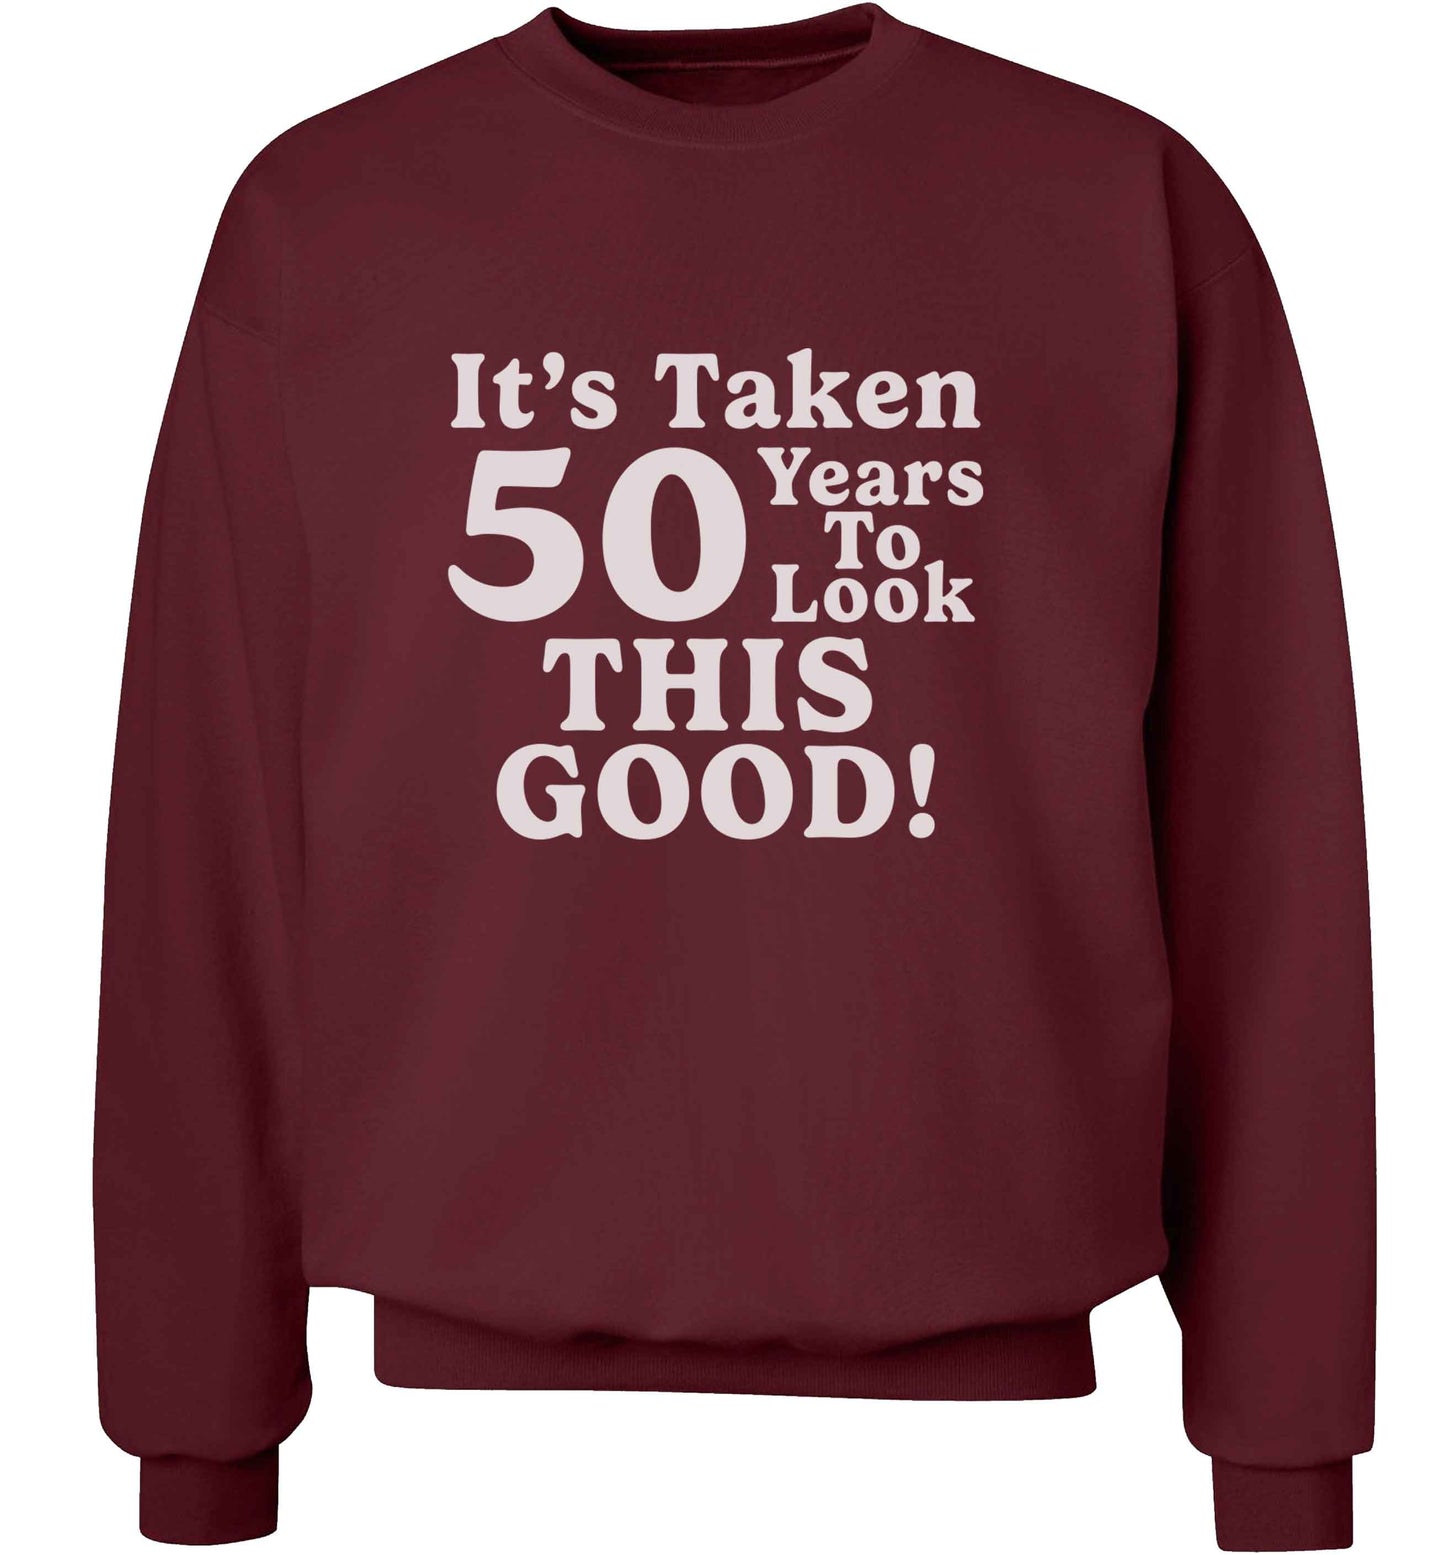 It's taken 50 years to look this good! adult's unisex maroon sweater 2XL